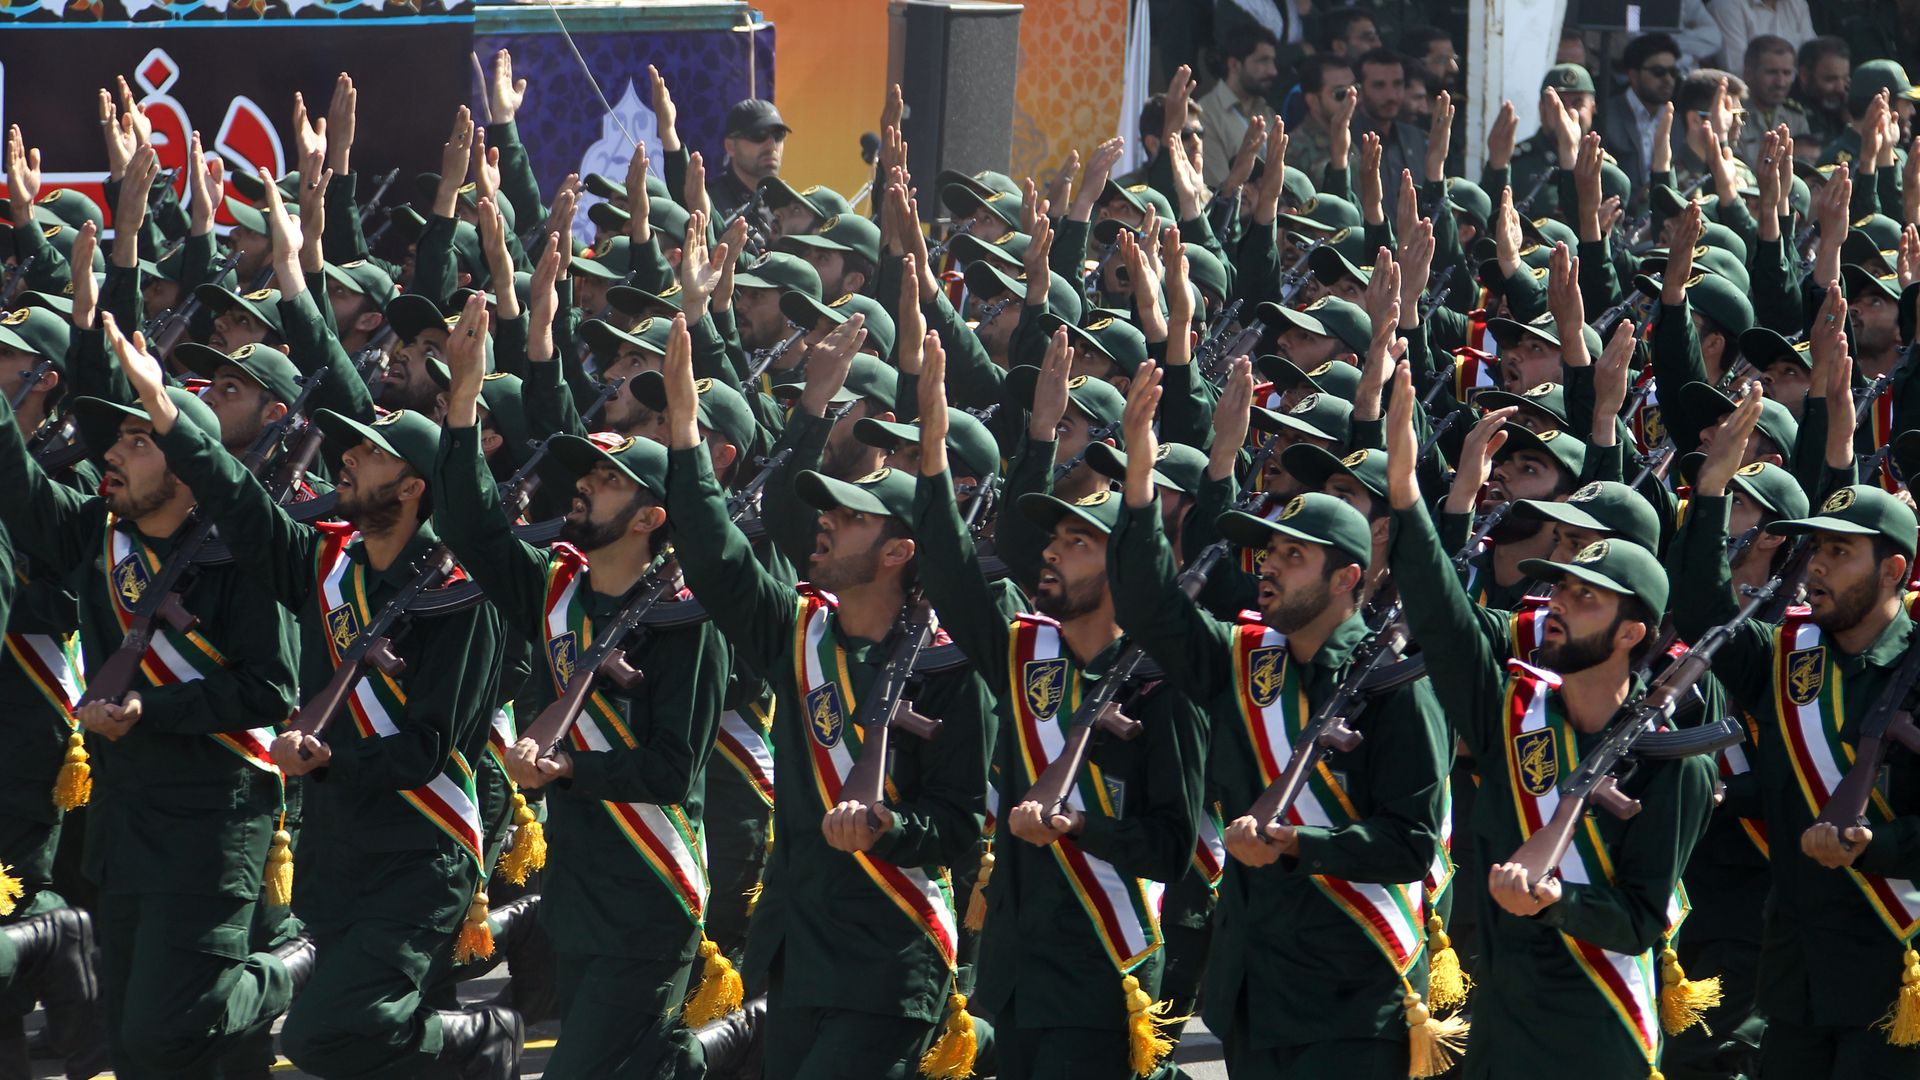 Members of the elite Revolutionary Guards